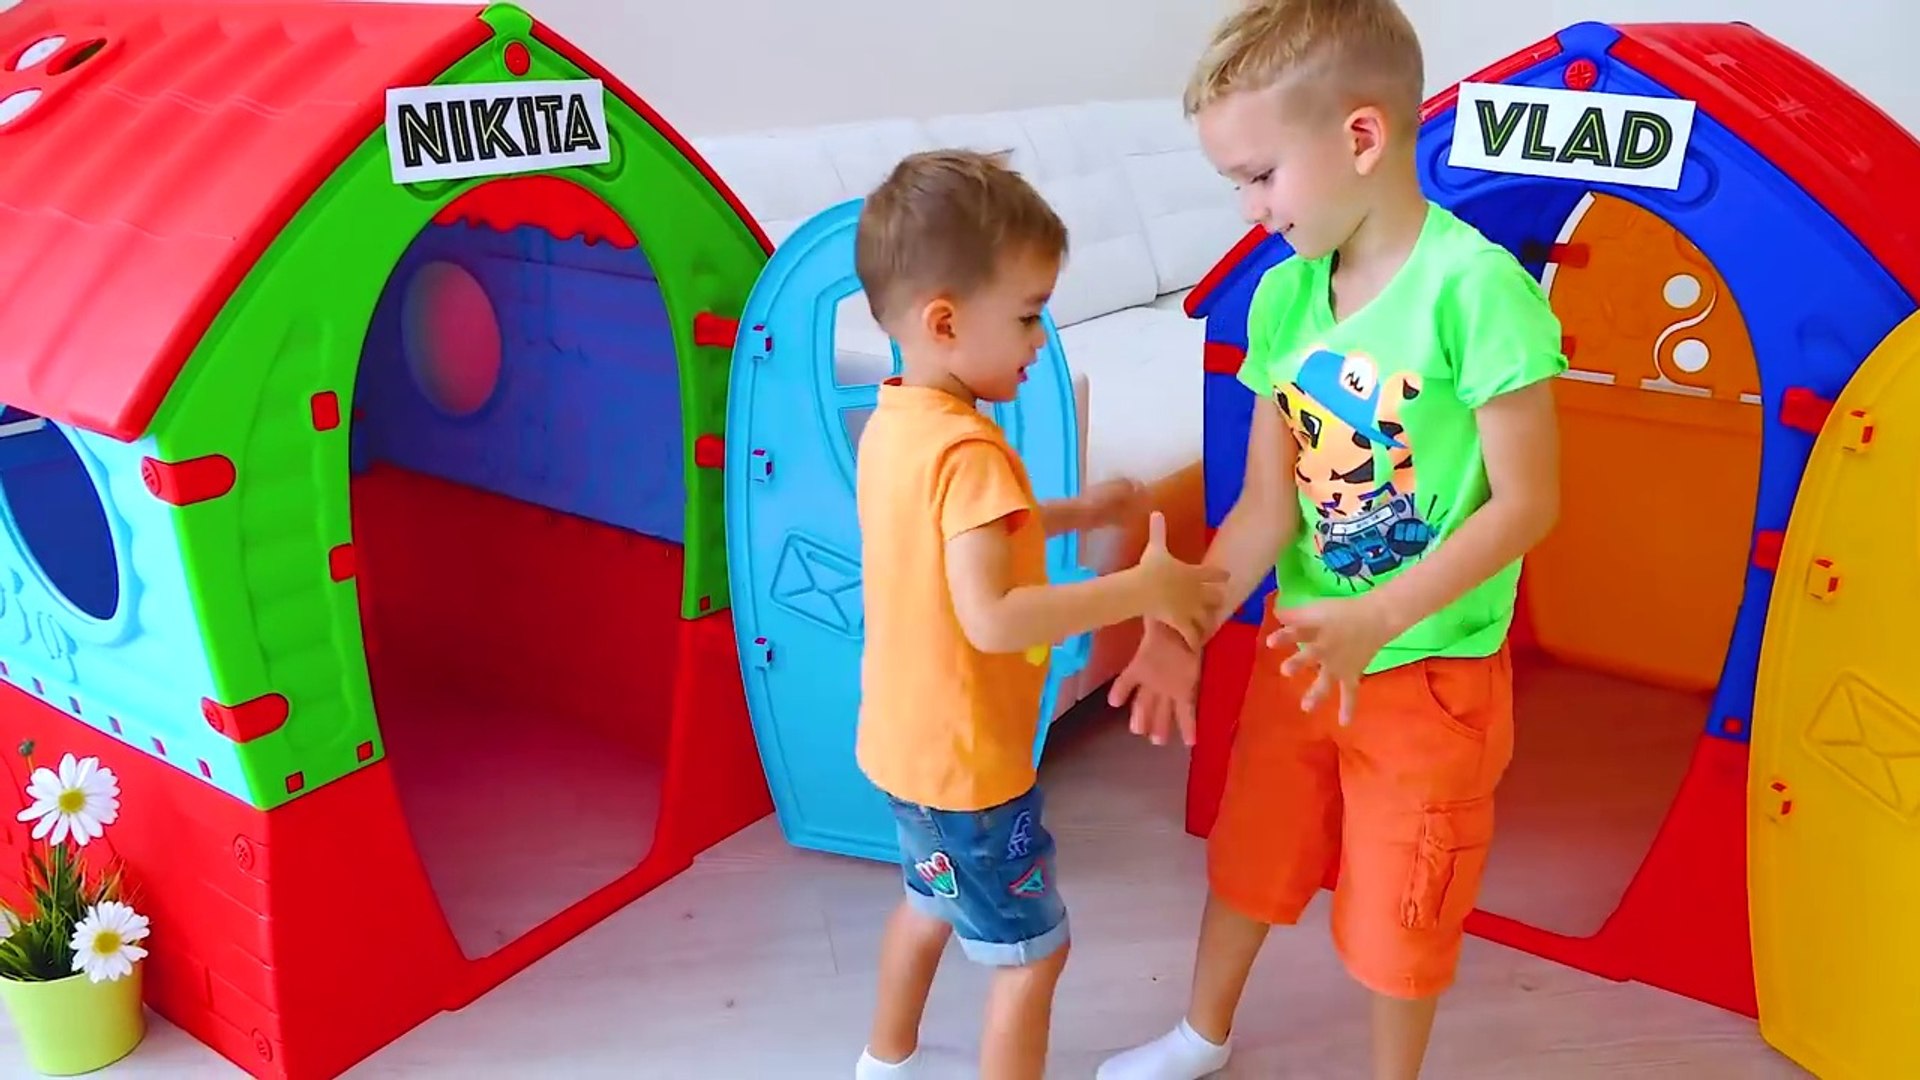 Vlad and Nikita build Playhouses for children - video dailymotion